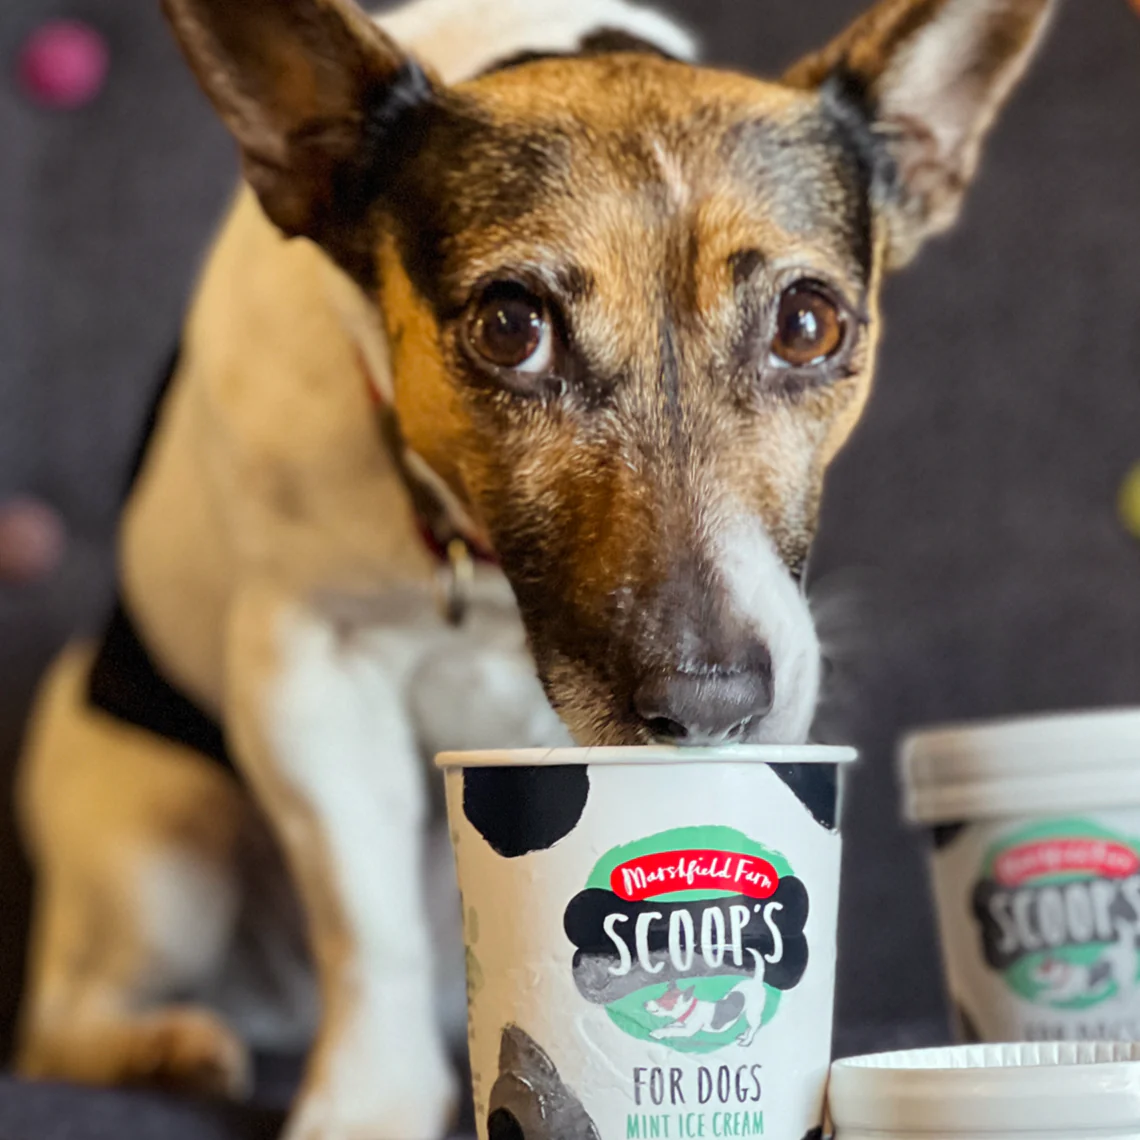 Scoops Ice Cream for dogs Mint